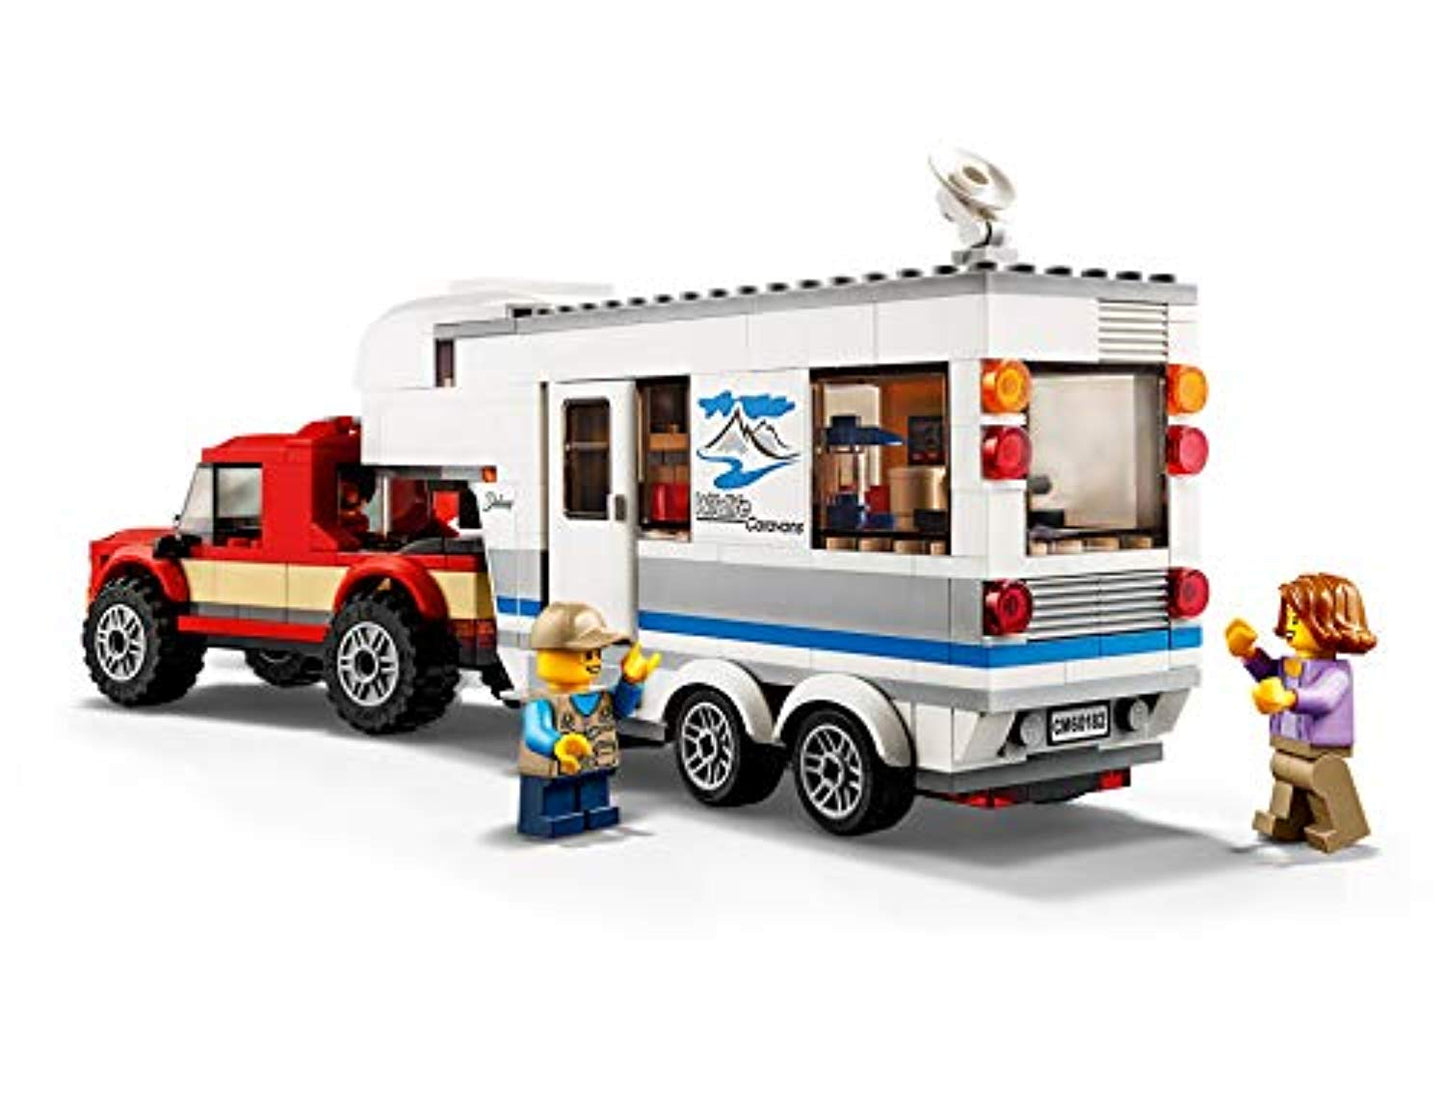 LEGO 60182 City Great Vehicles Pickup and Caravan Truck Toy with 3 Explorer Minifigures, Holiday Sets for Kids - Offer Games